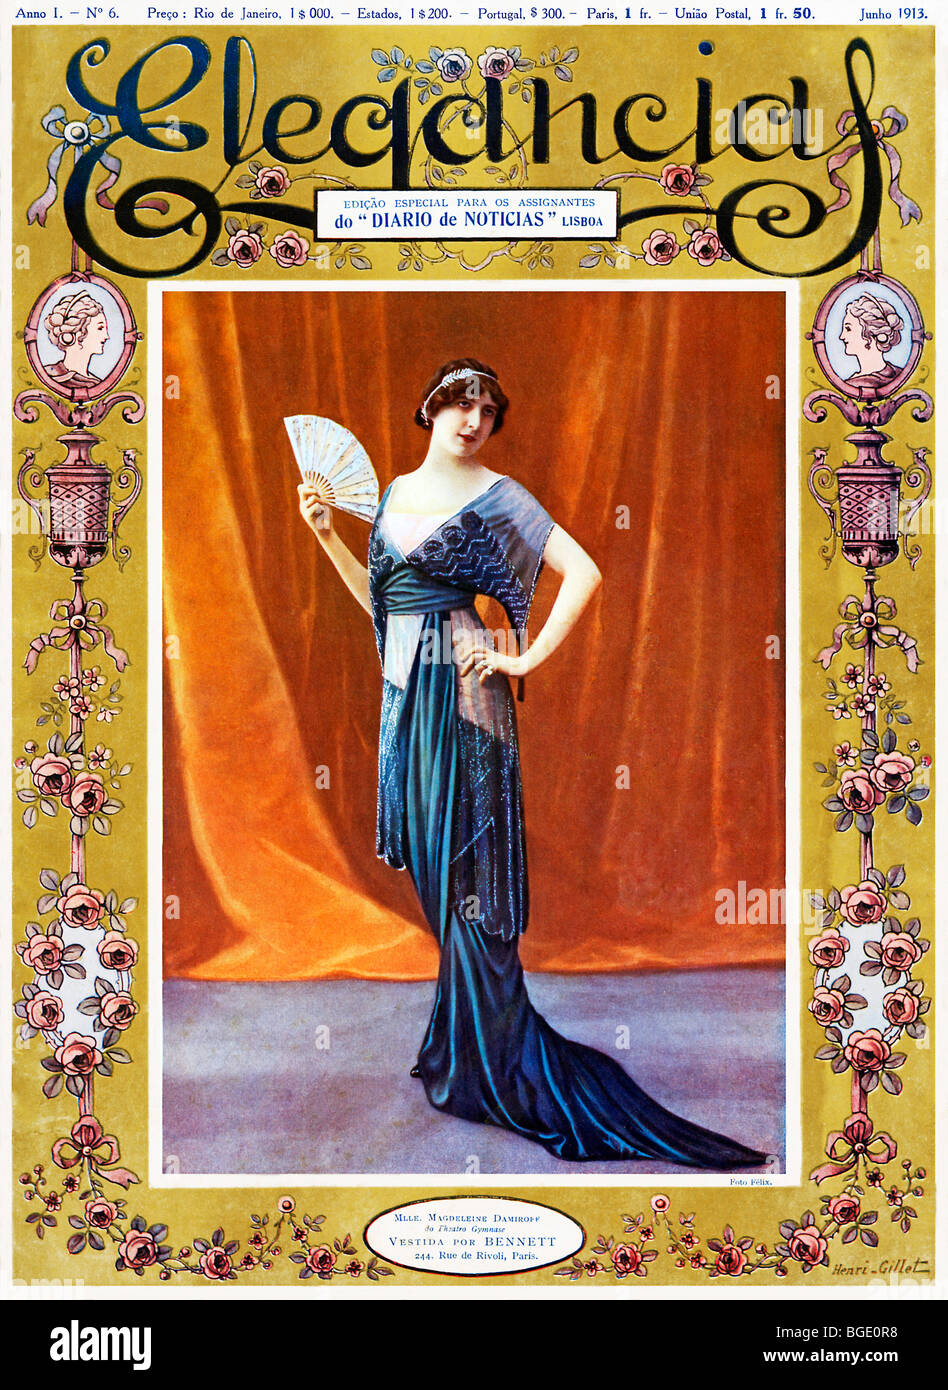 Elegencias, 1913 cover of the Portugese fashion mag, actress Magdeleine Damiroff models French fashion from Bennett Stock Photo